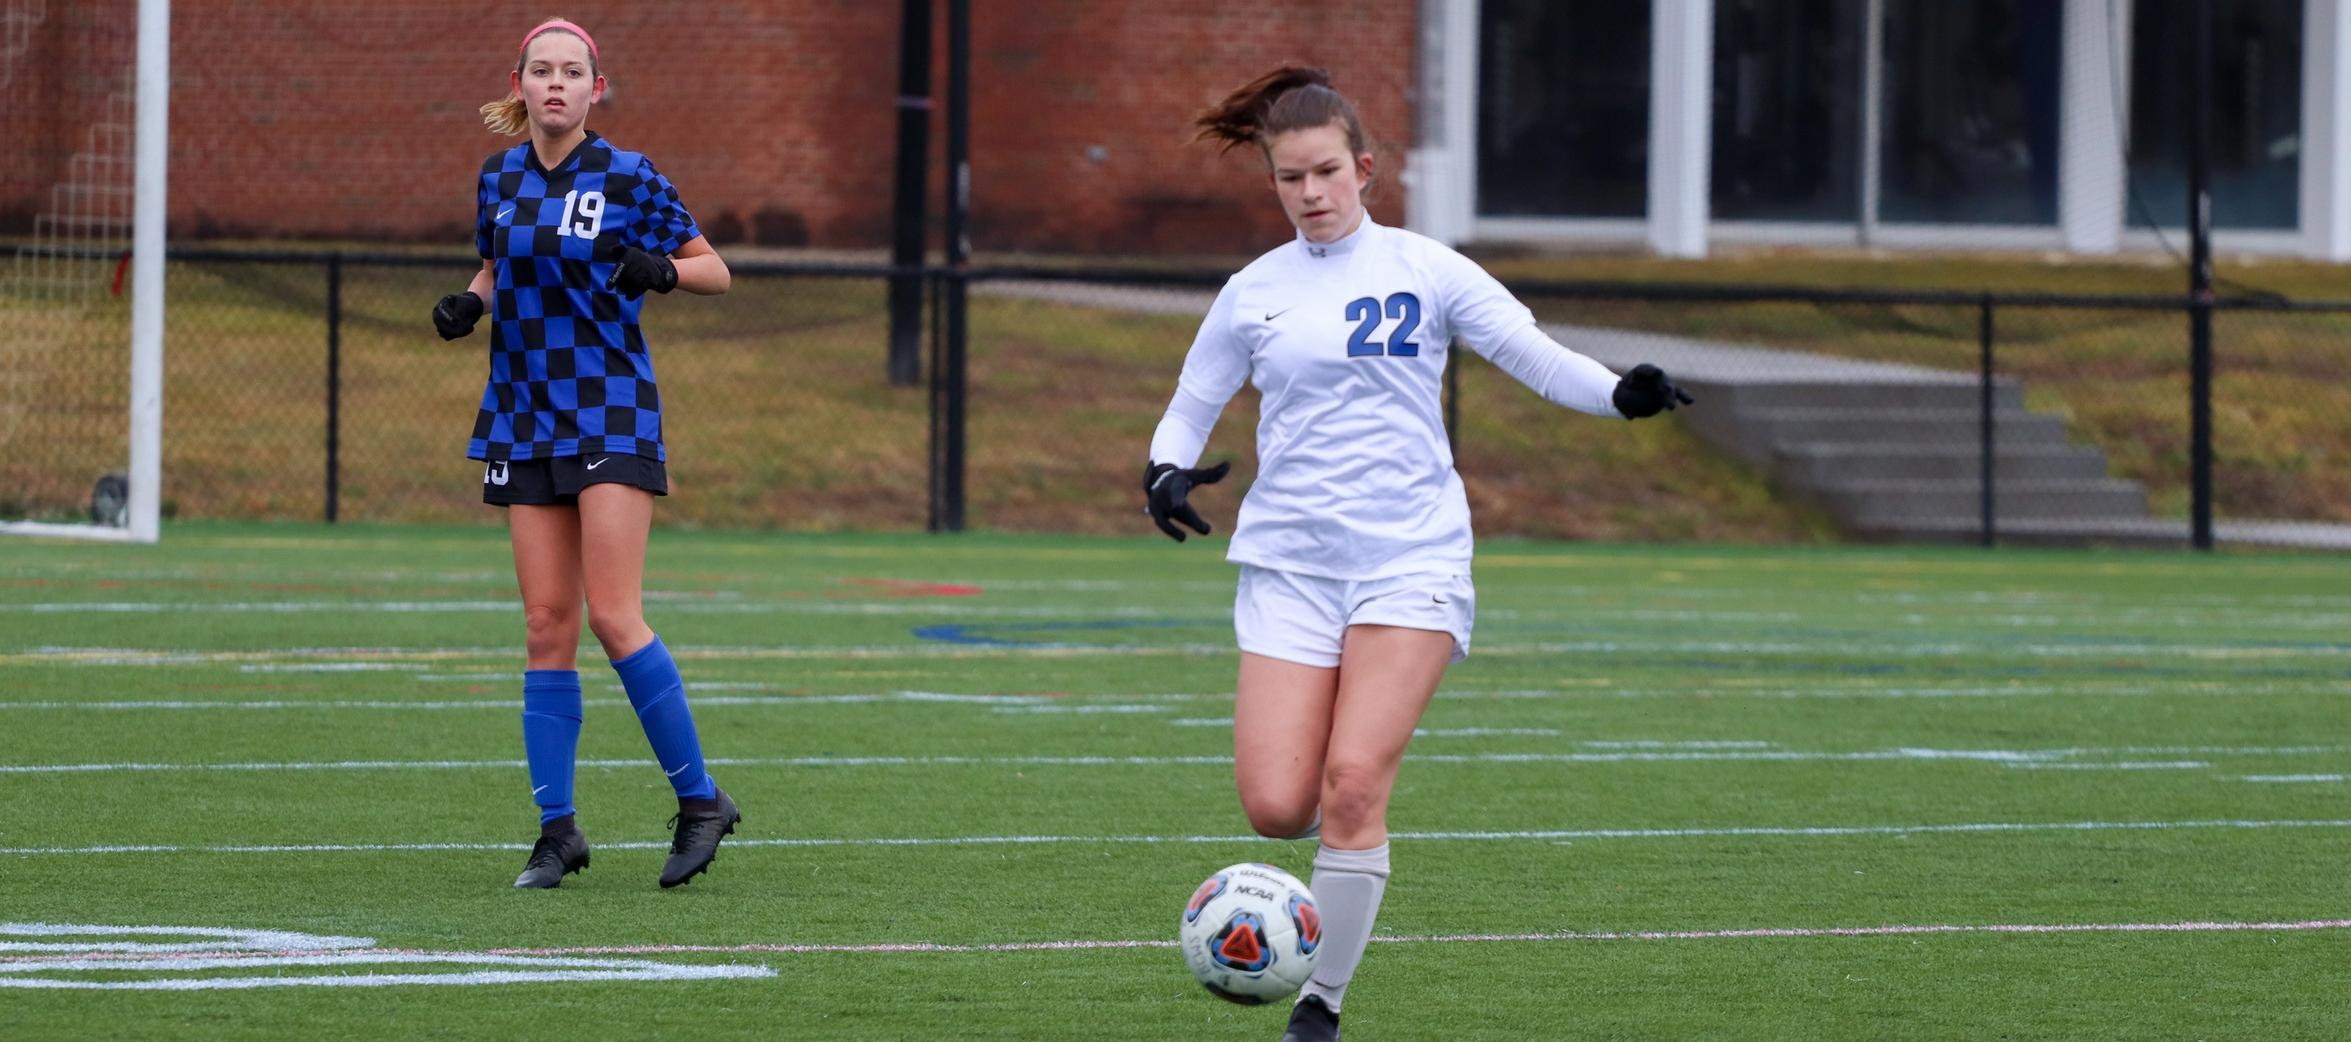 Freshman forward Taylor Richardson struck for a pair of goals in Brevard's 3-1 triumph over Berea (Photo courtesy of Victoria Brayman '22 and Brianna Rodibaugh '24).